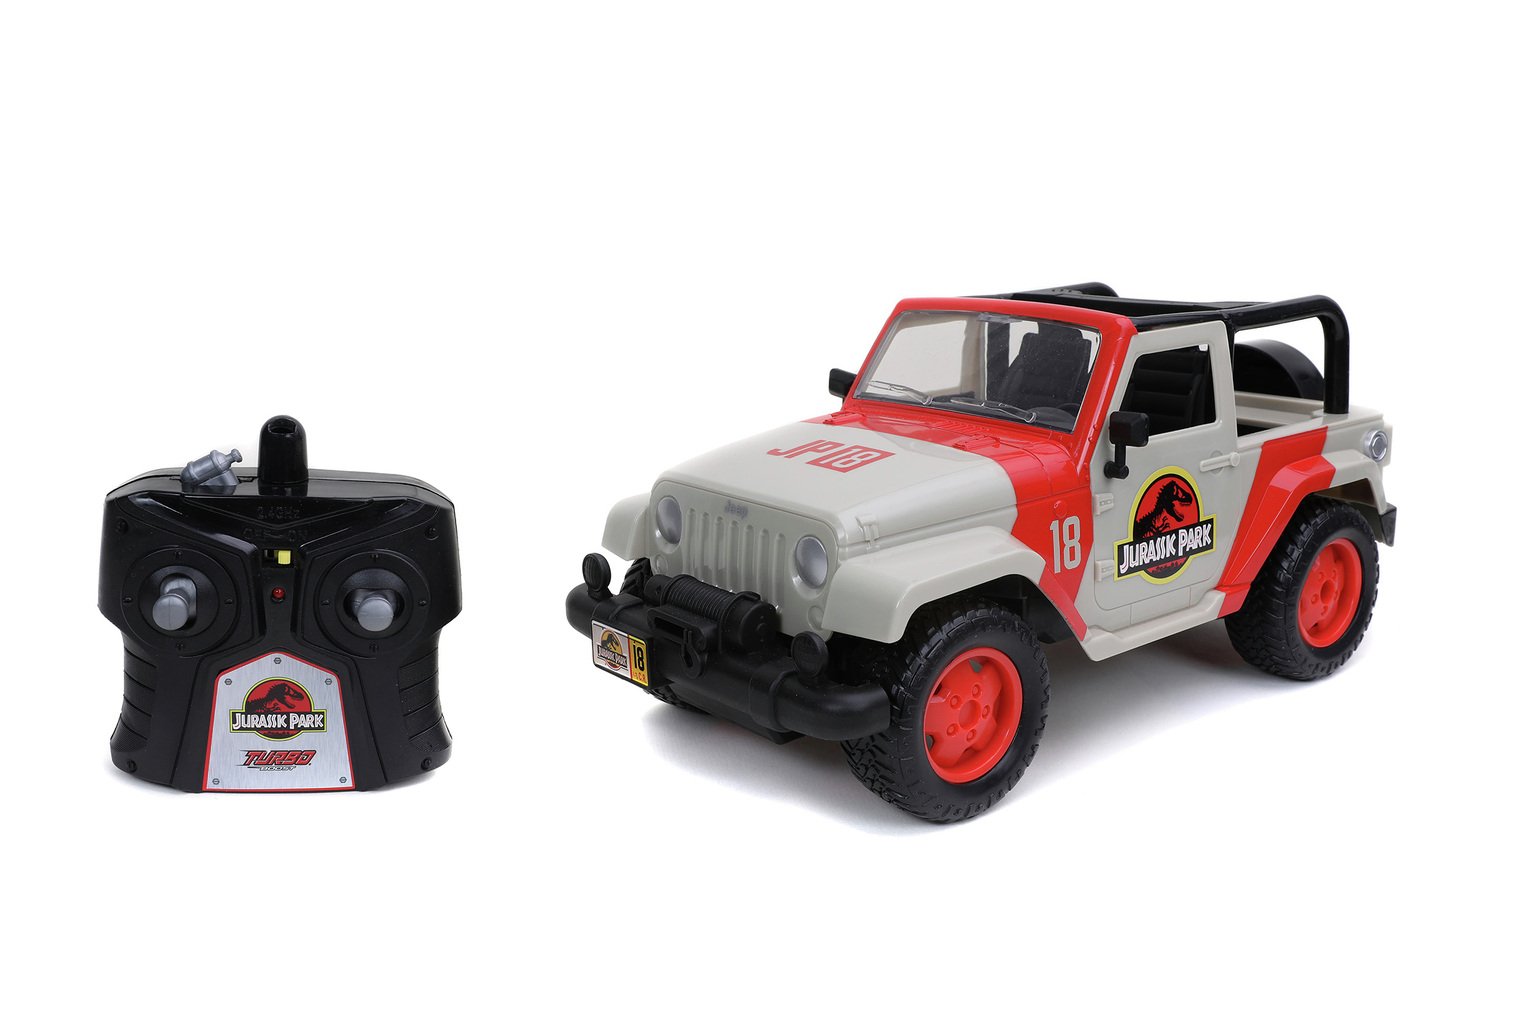 Jurassic Park Jeep Wrangler 1:16 Radio Controlled Buggie review